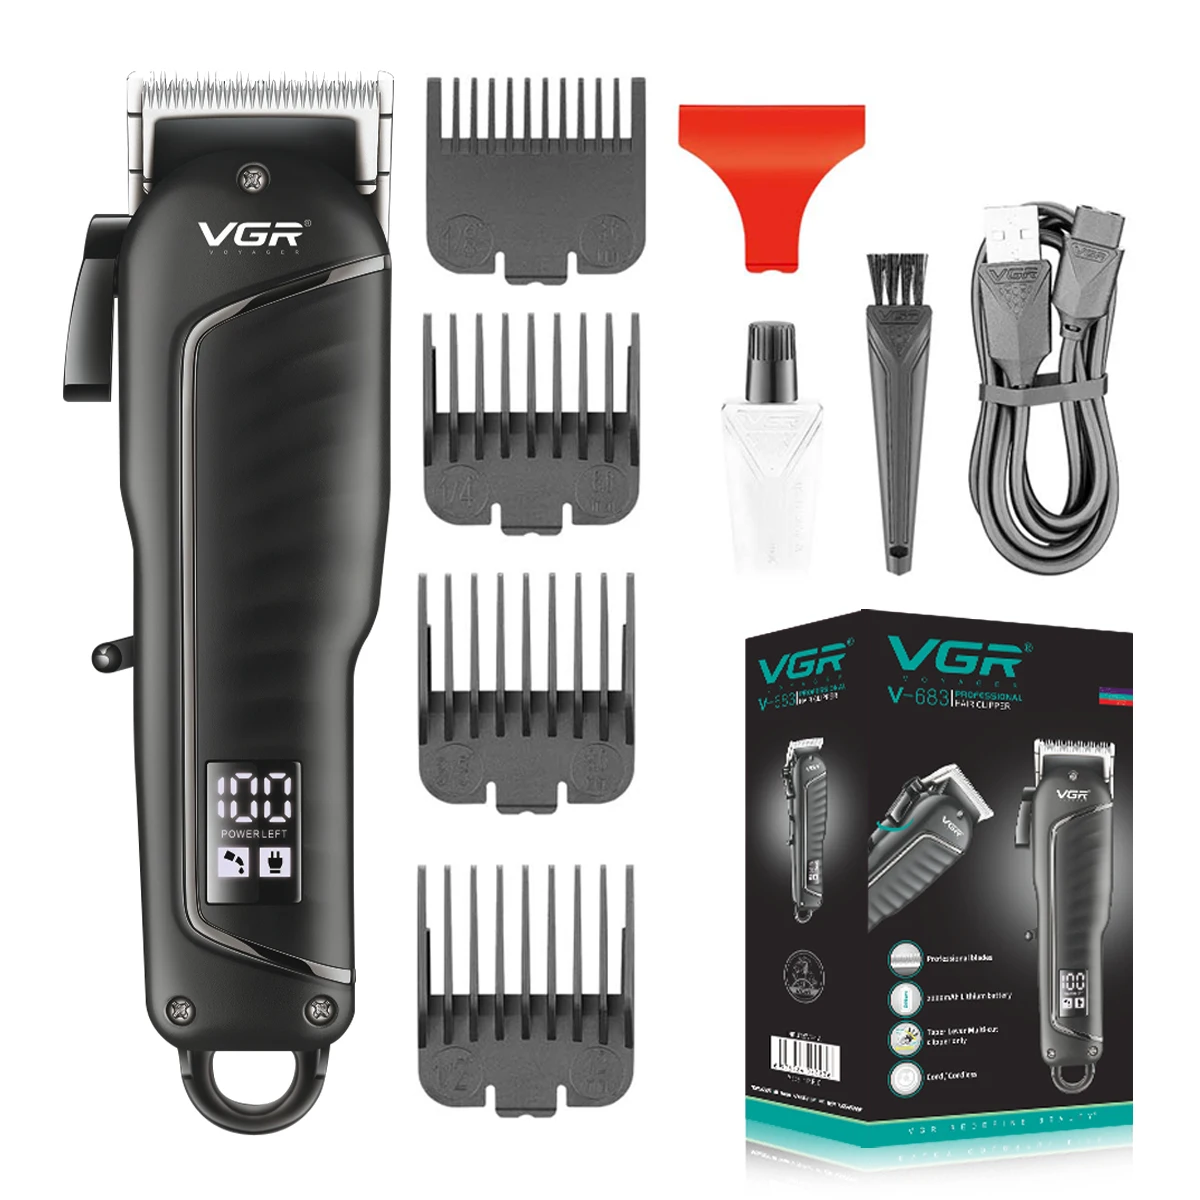 Vgr V-683 New Modle Professional Electric Hair Trimmer Cord And Cordless  Hair Clipper For Men Hair Cutting Machine - Buy Trimer Machine Professional  Hair Clipper,Hair Clippers Cutter,New Hair Clippers Product on 